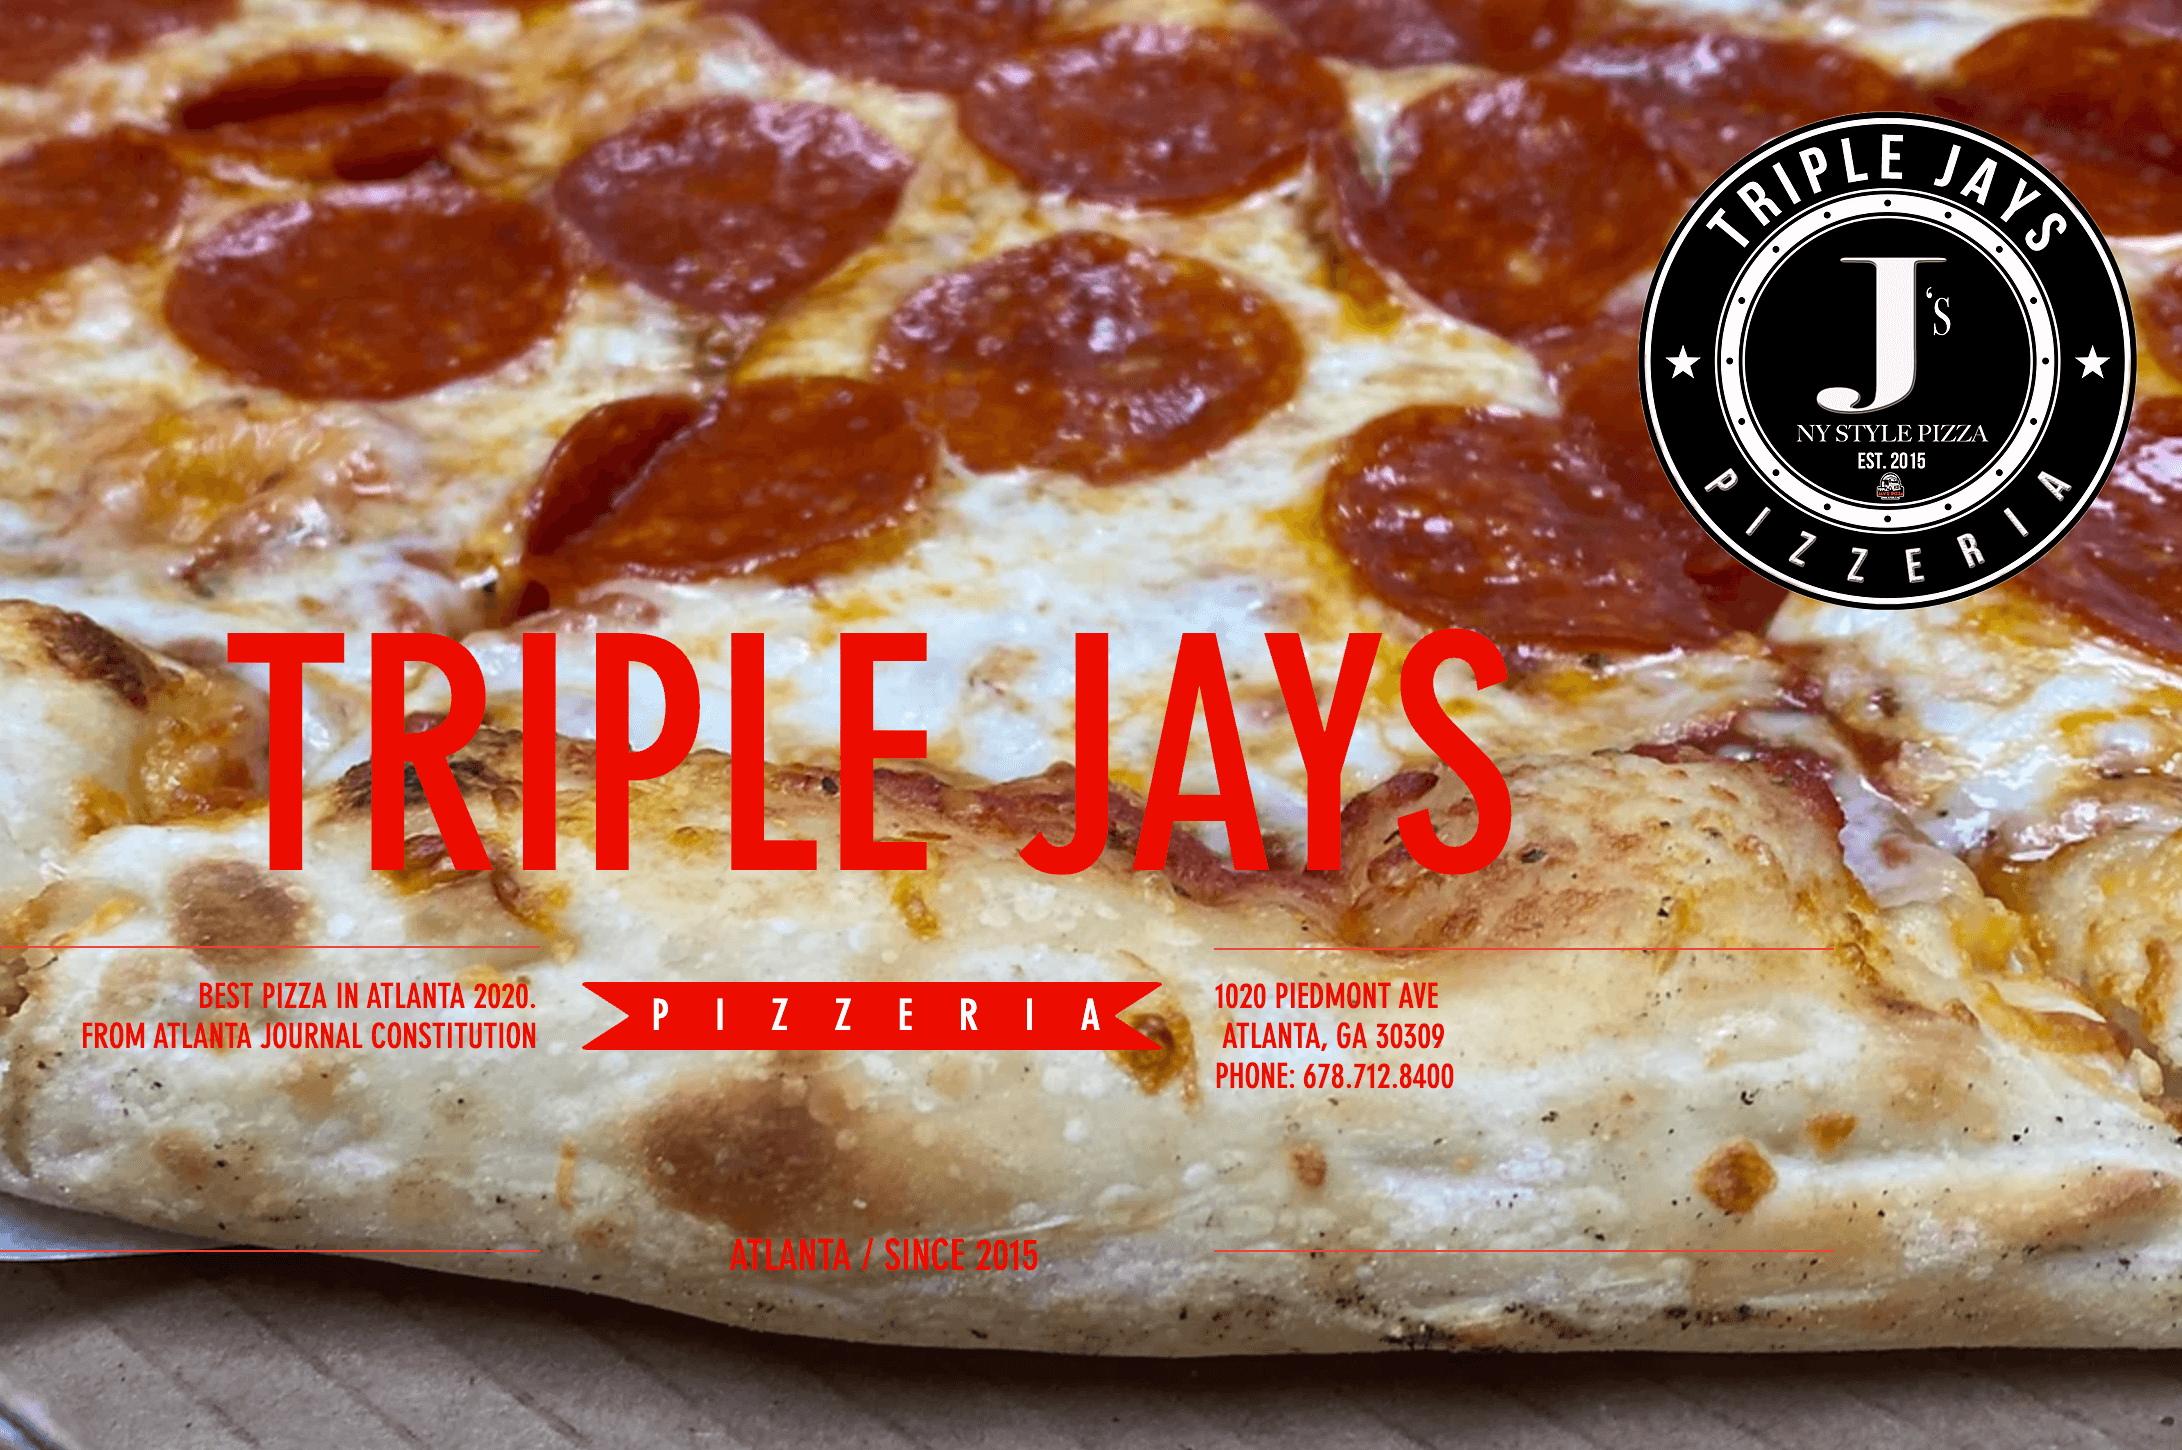 Triple Jays Pizzeria's homepage featuring a closeup hero image of a pepperoni pizza